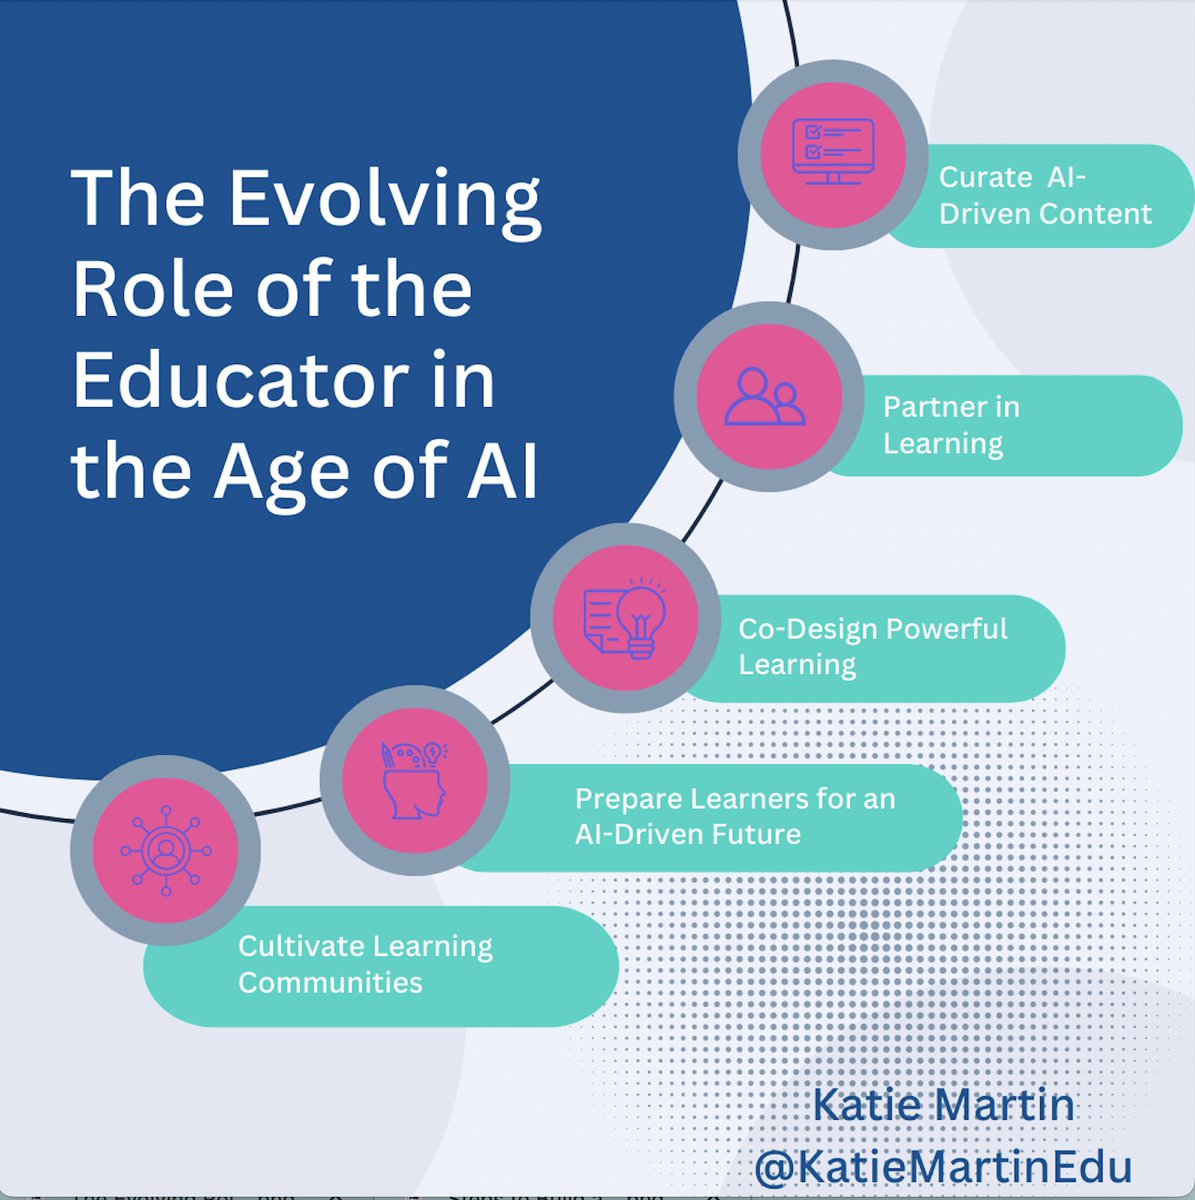 The Evolving Role of Educators in the Age of AI buff.ly/42YmDbx

#ai #learnercentered #istelive #notatiste #evolvingeducation